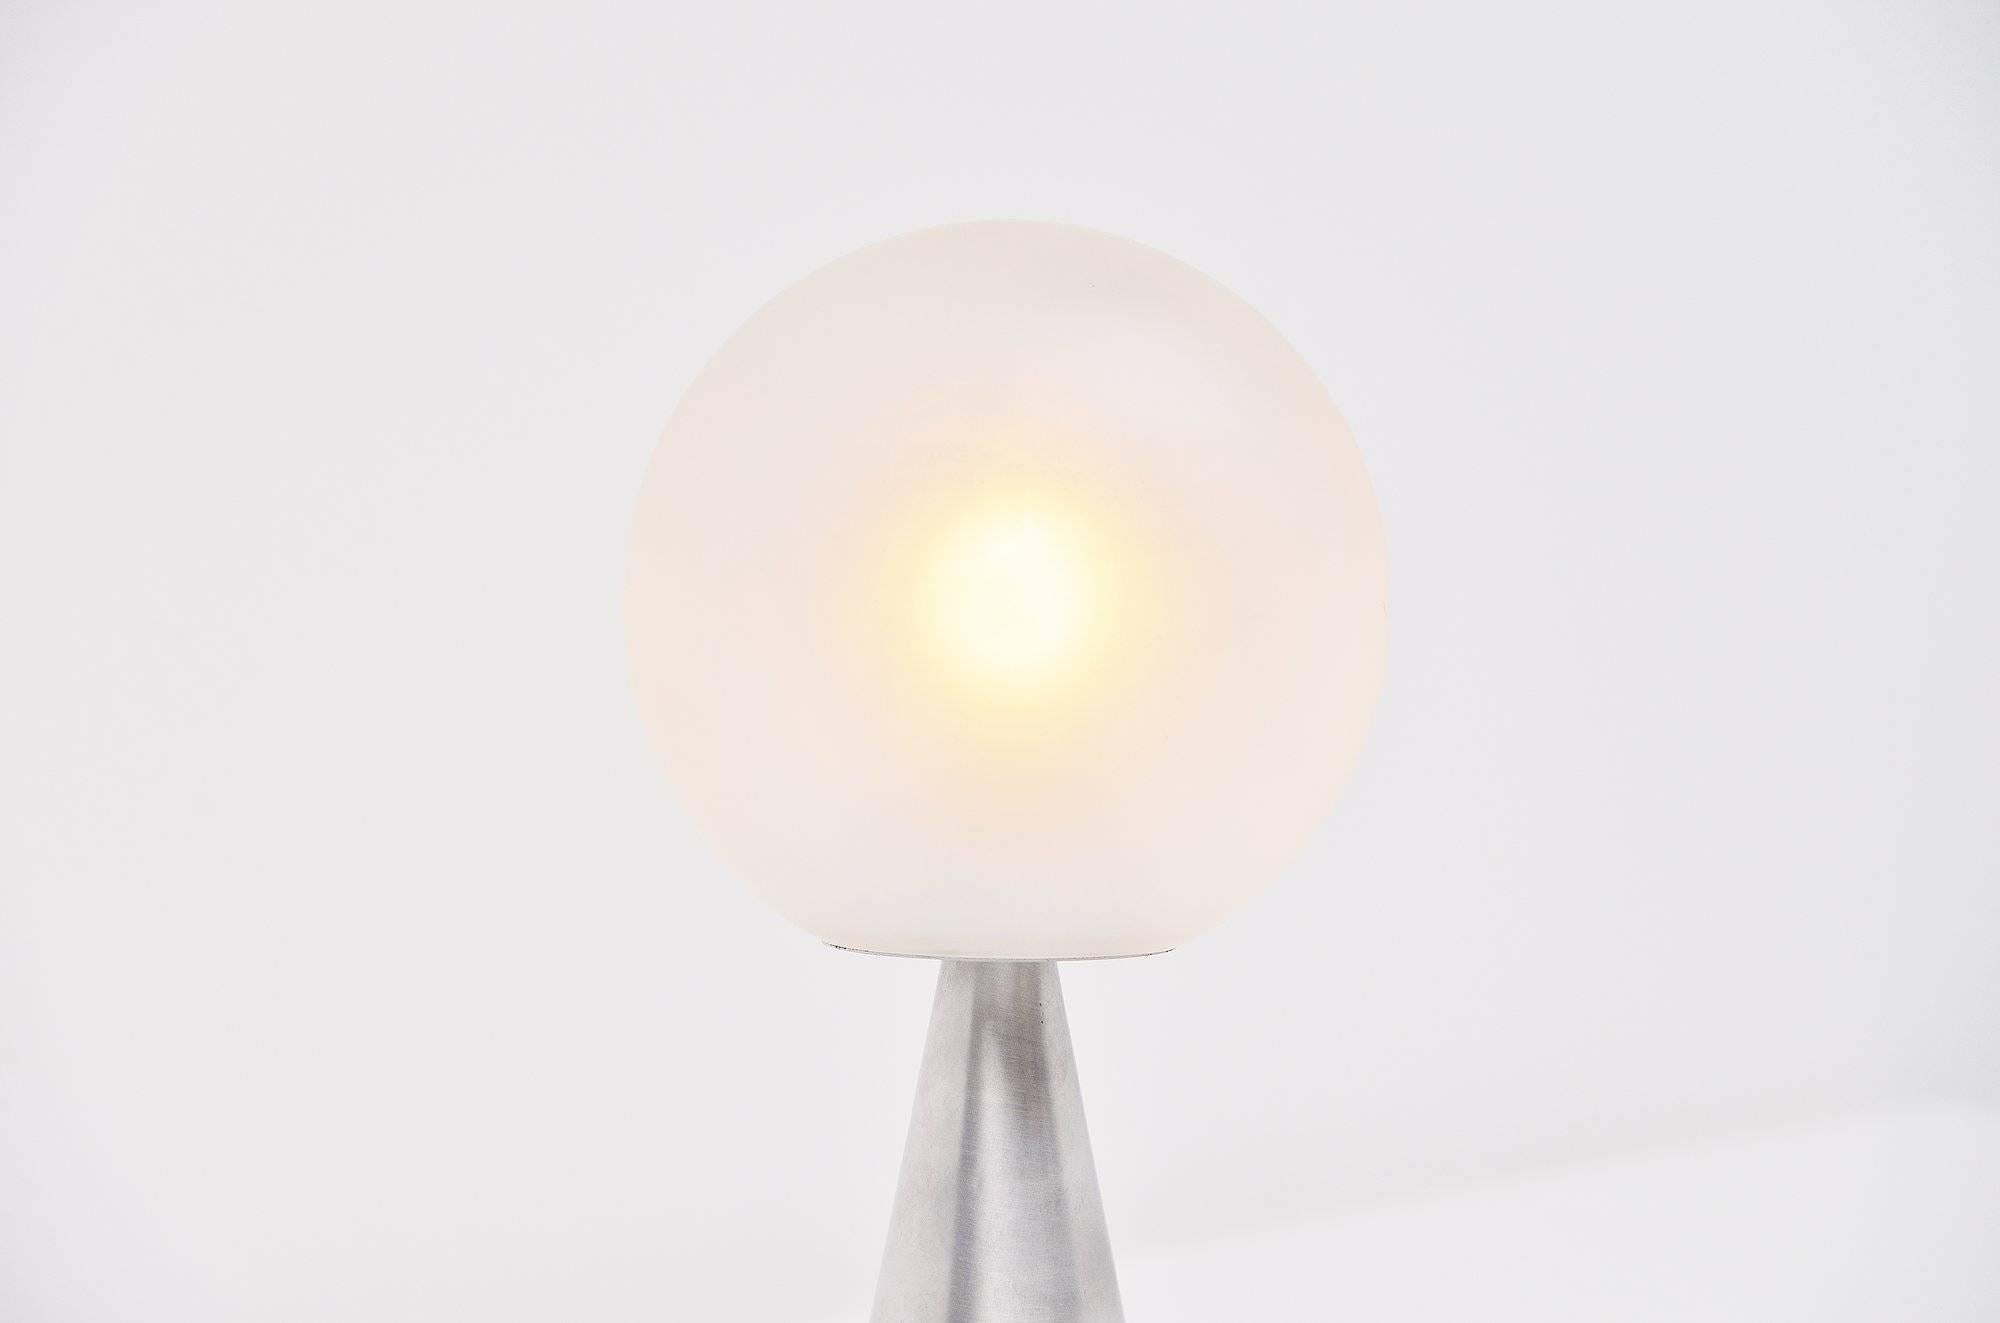 Rare early ‘Bilia’ table lamp Model no. 2474 designed by Gio Ponti, manufactured by Fontana Arte, Italy, 1960. This rare early lamp has an aluminium weighted base and a frosted matte glass globe. The lamp gives very nice and warm spherical light